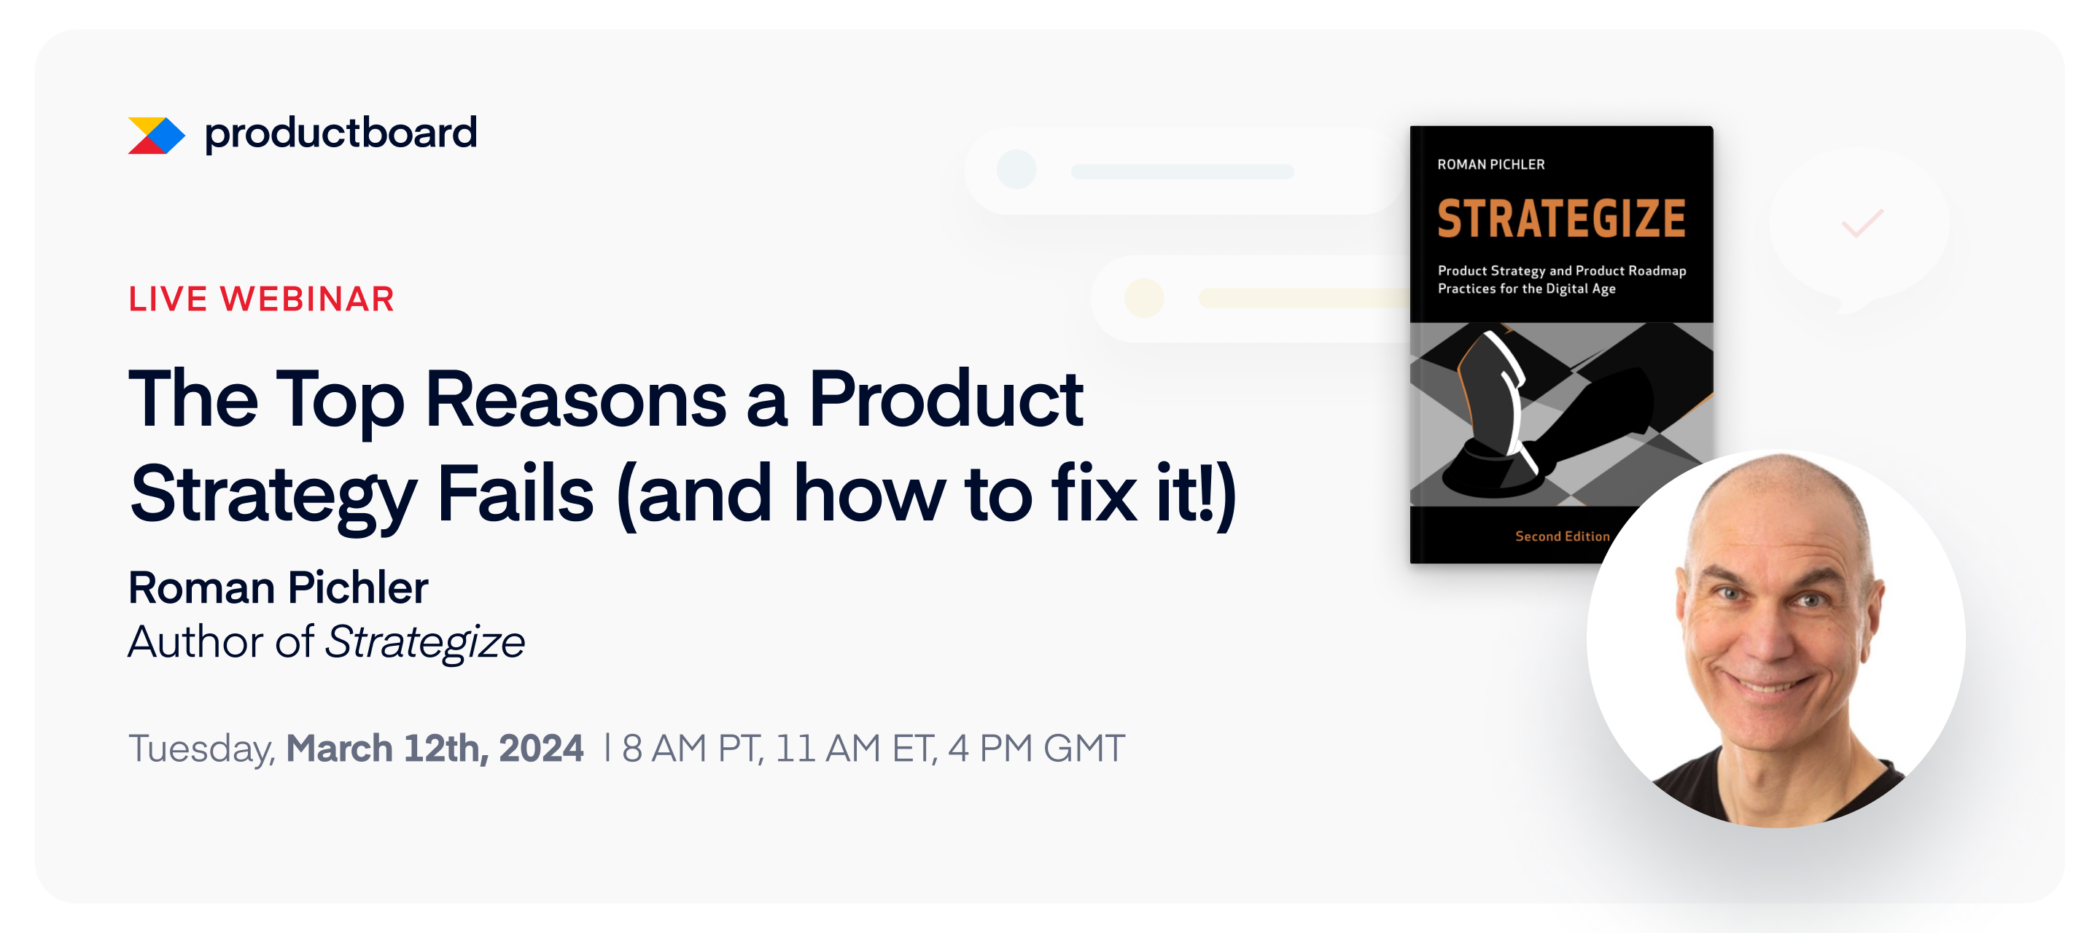 The Top Reasons a Product Strategy Fails (and how to fix it!)